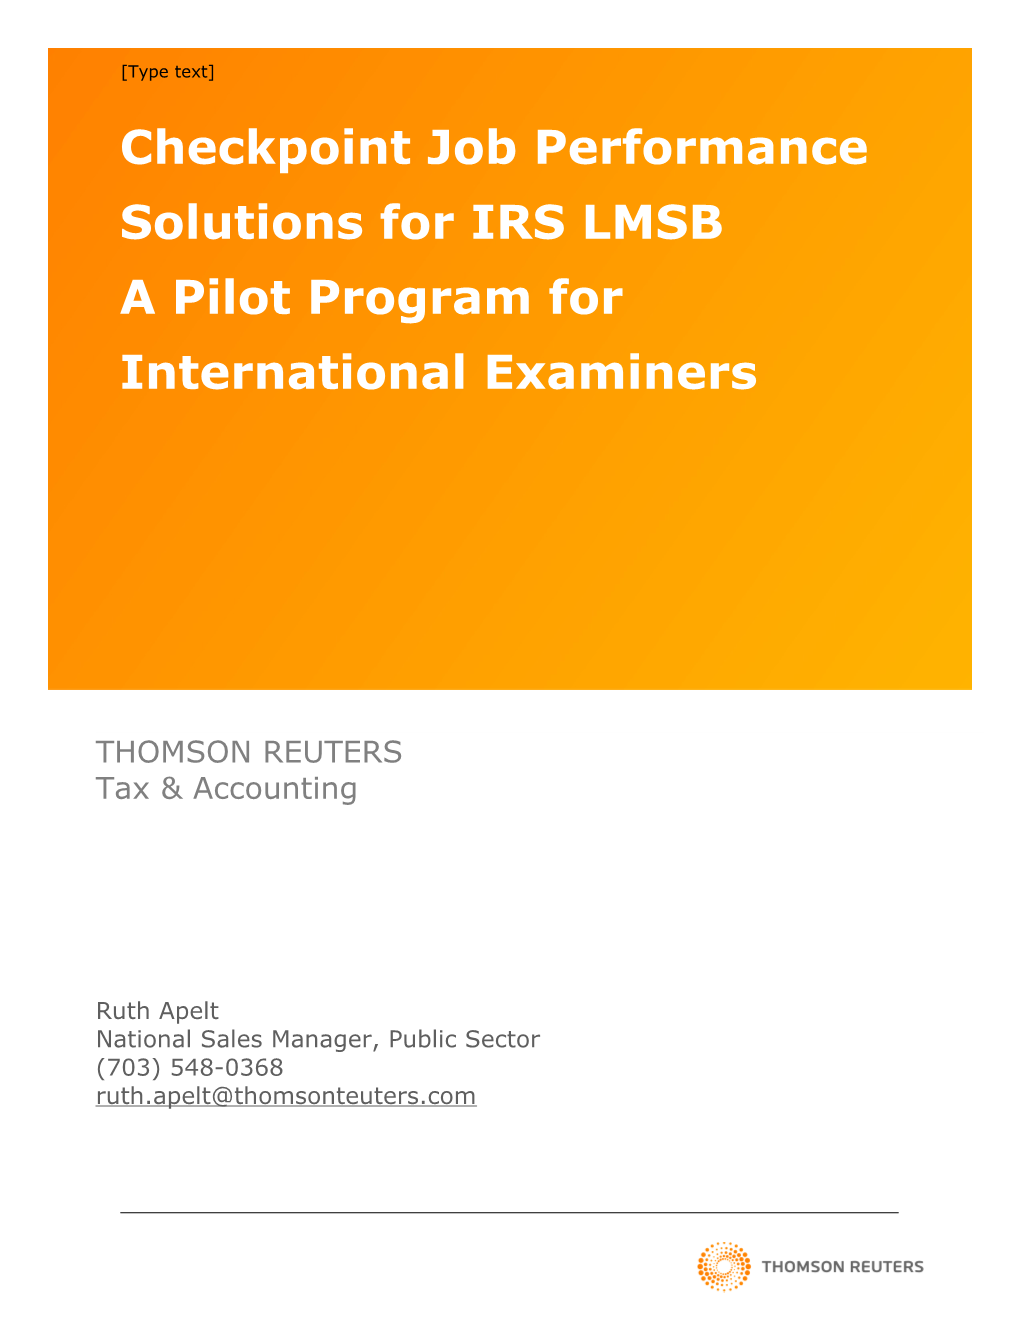 Checkpoint Job Performance Solutions for IRS LMSB